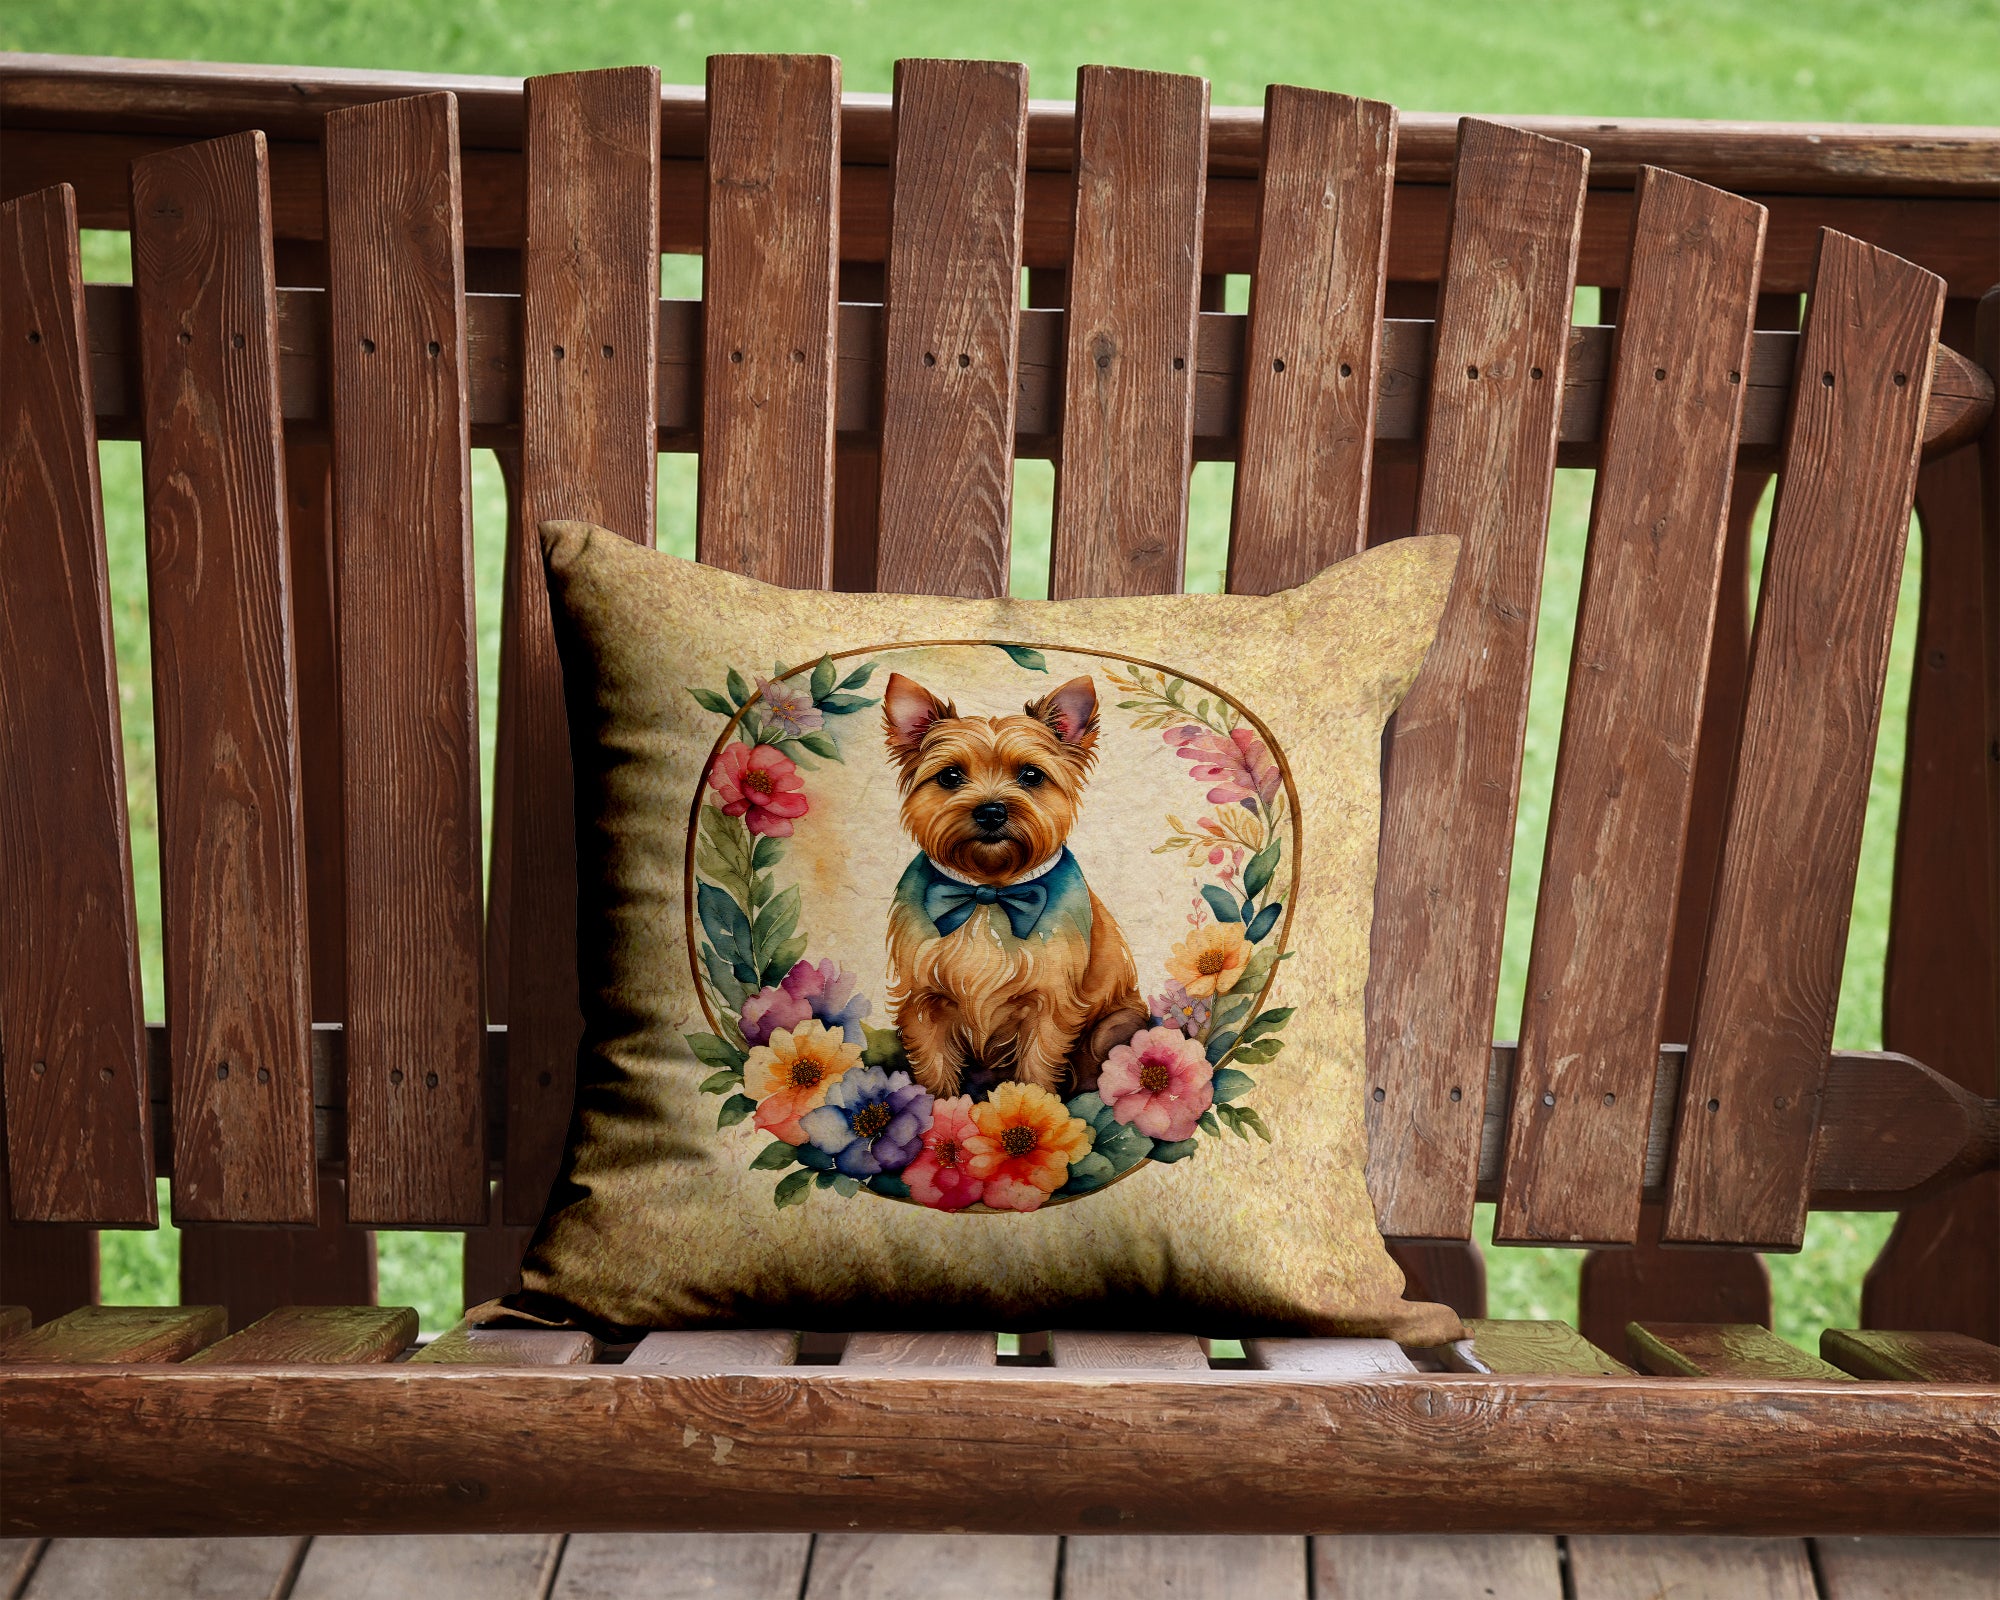 Buy this Norwich Terrier and Flowers Fabric Decorative Pillow